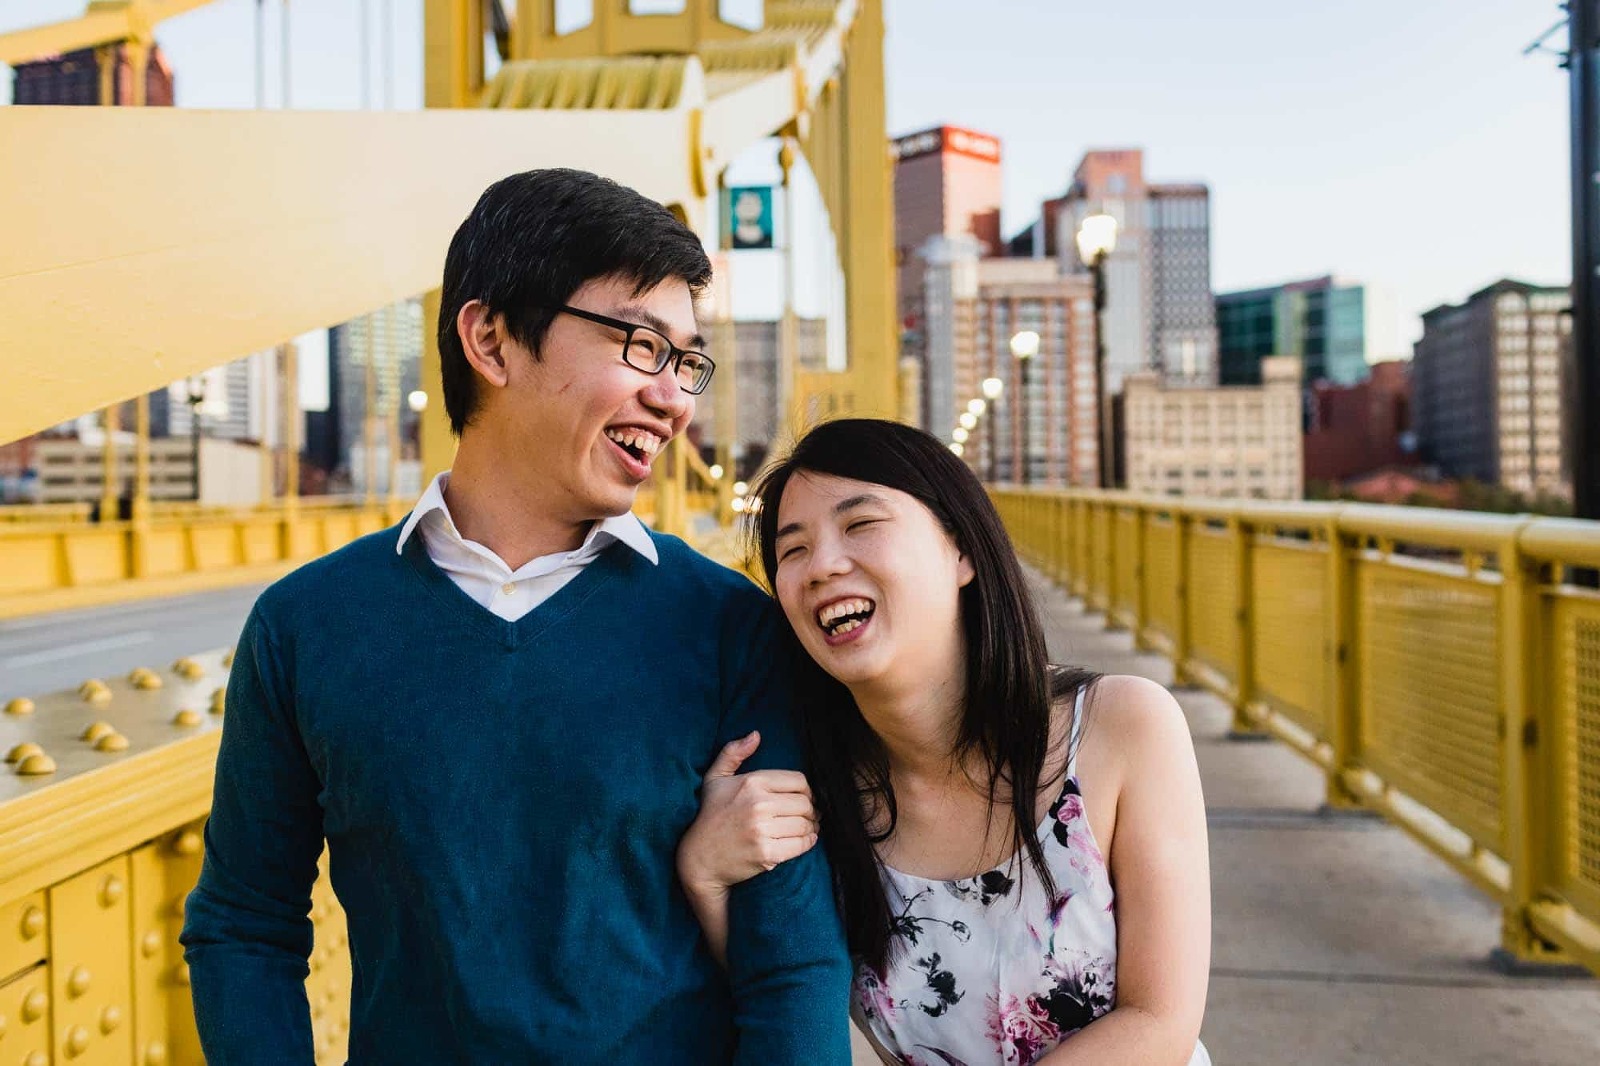 asian couple laugh together joyfully, framed by yellow bridge and city of pittsburgh